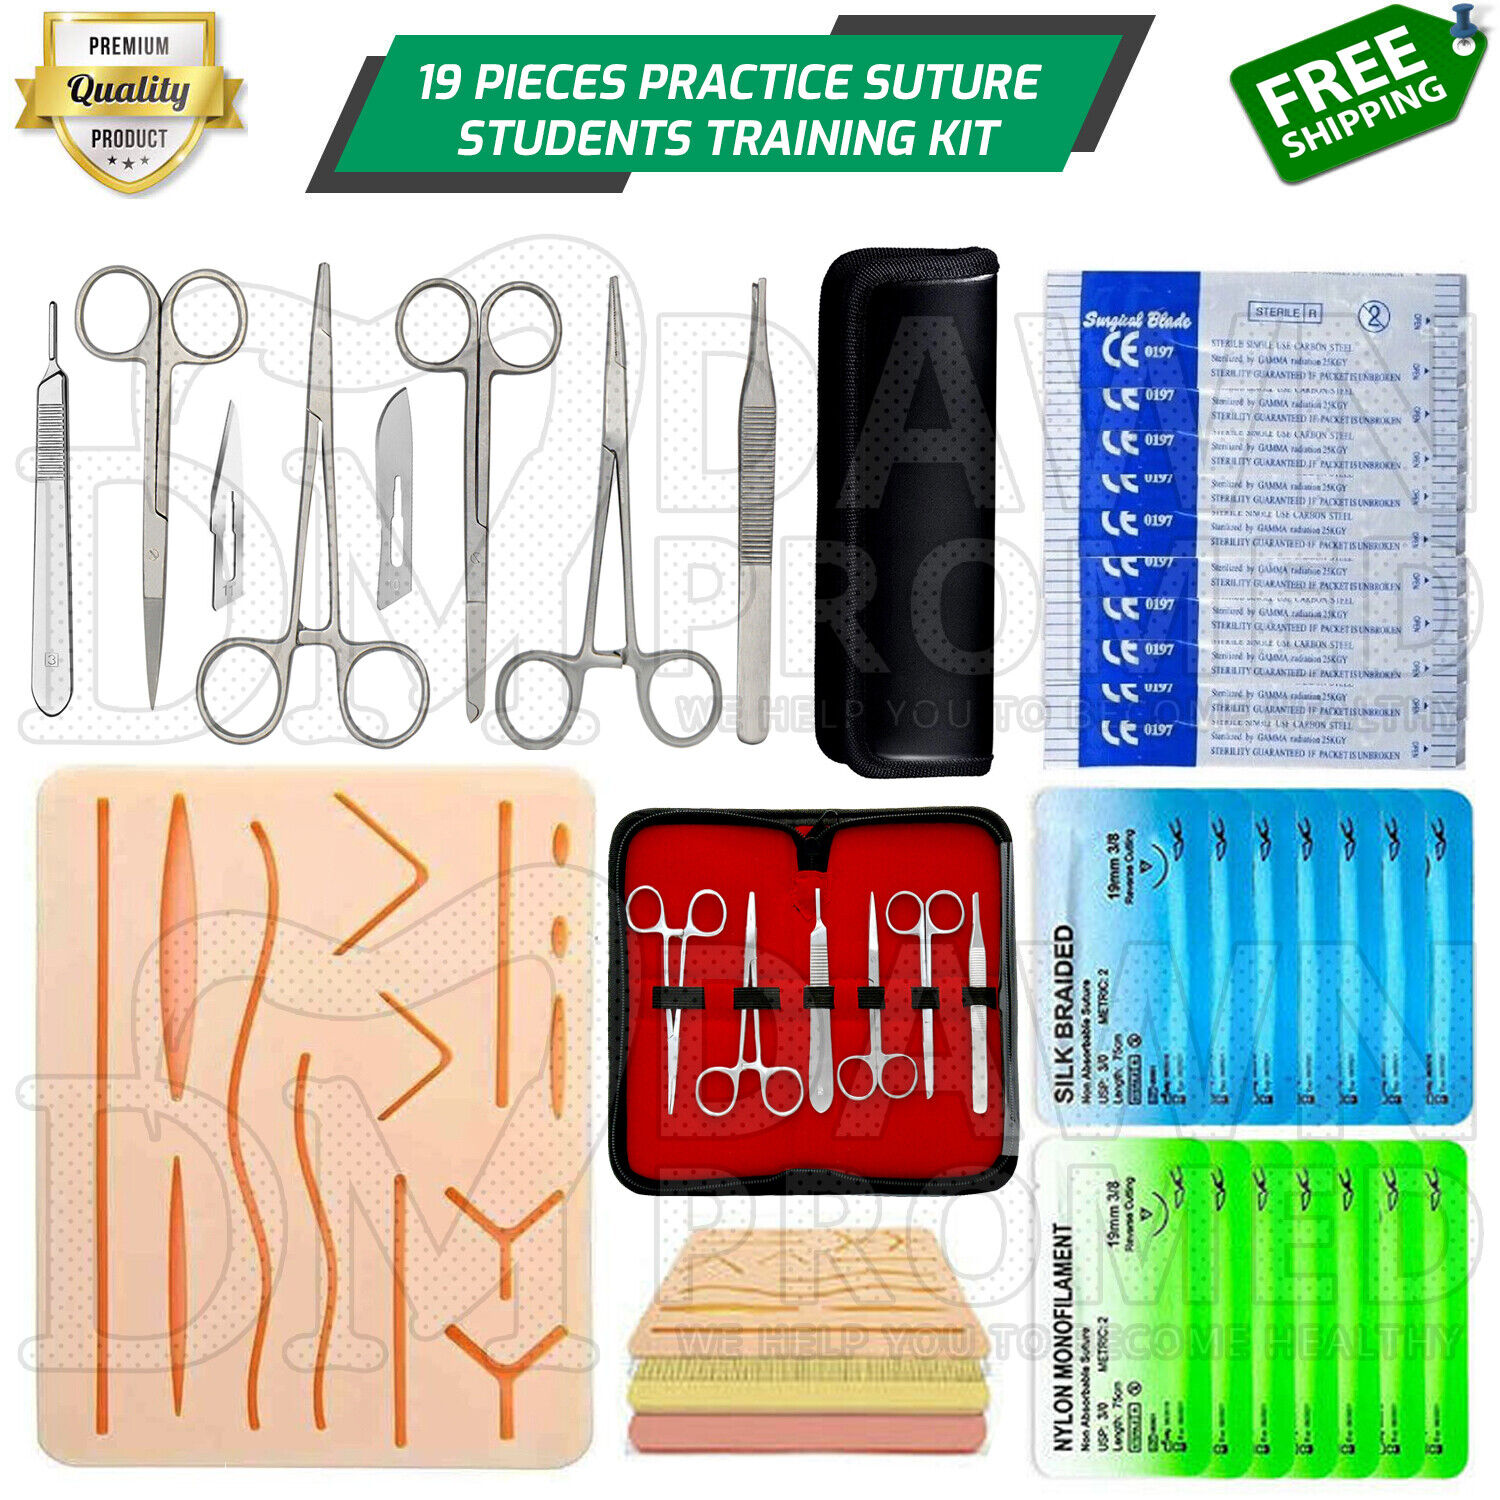 19 Pieces Practice Suture Kit with Pad for Medical Veterinary Student Training